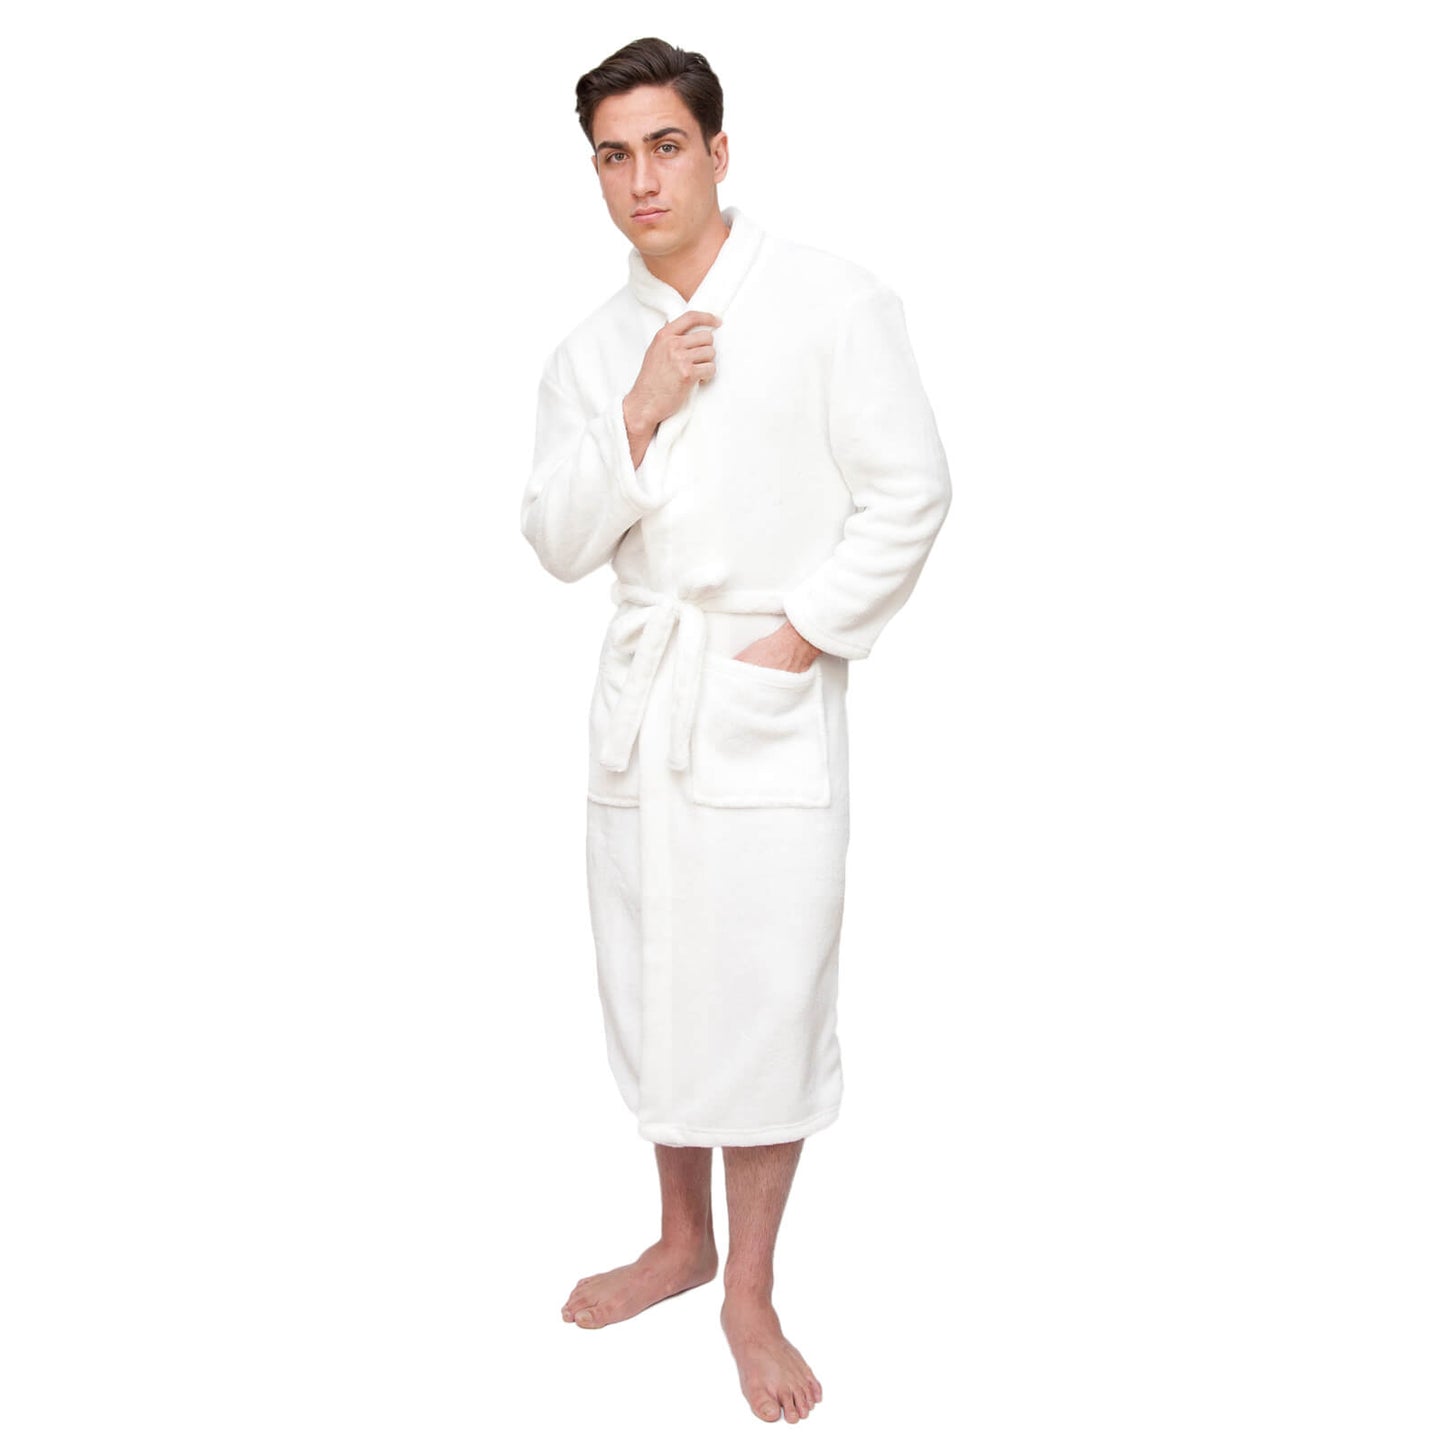 Robes for the Groom